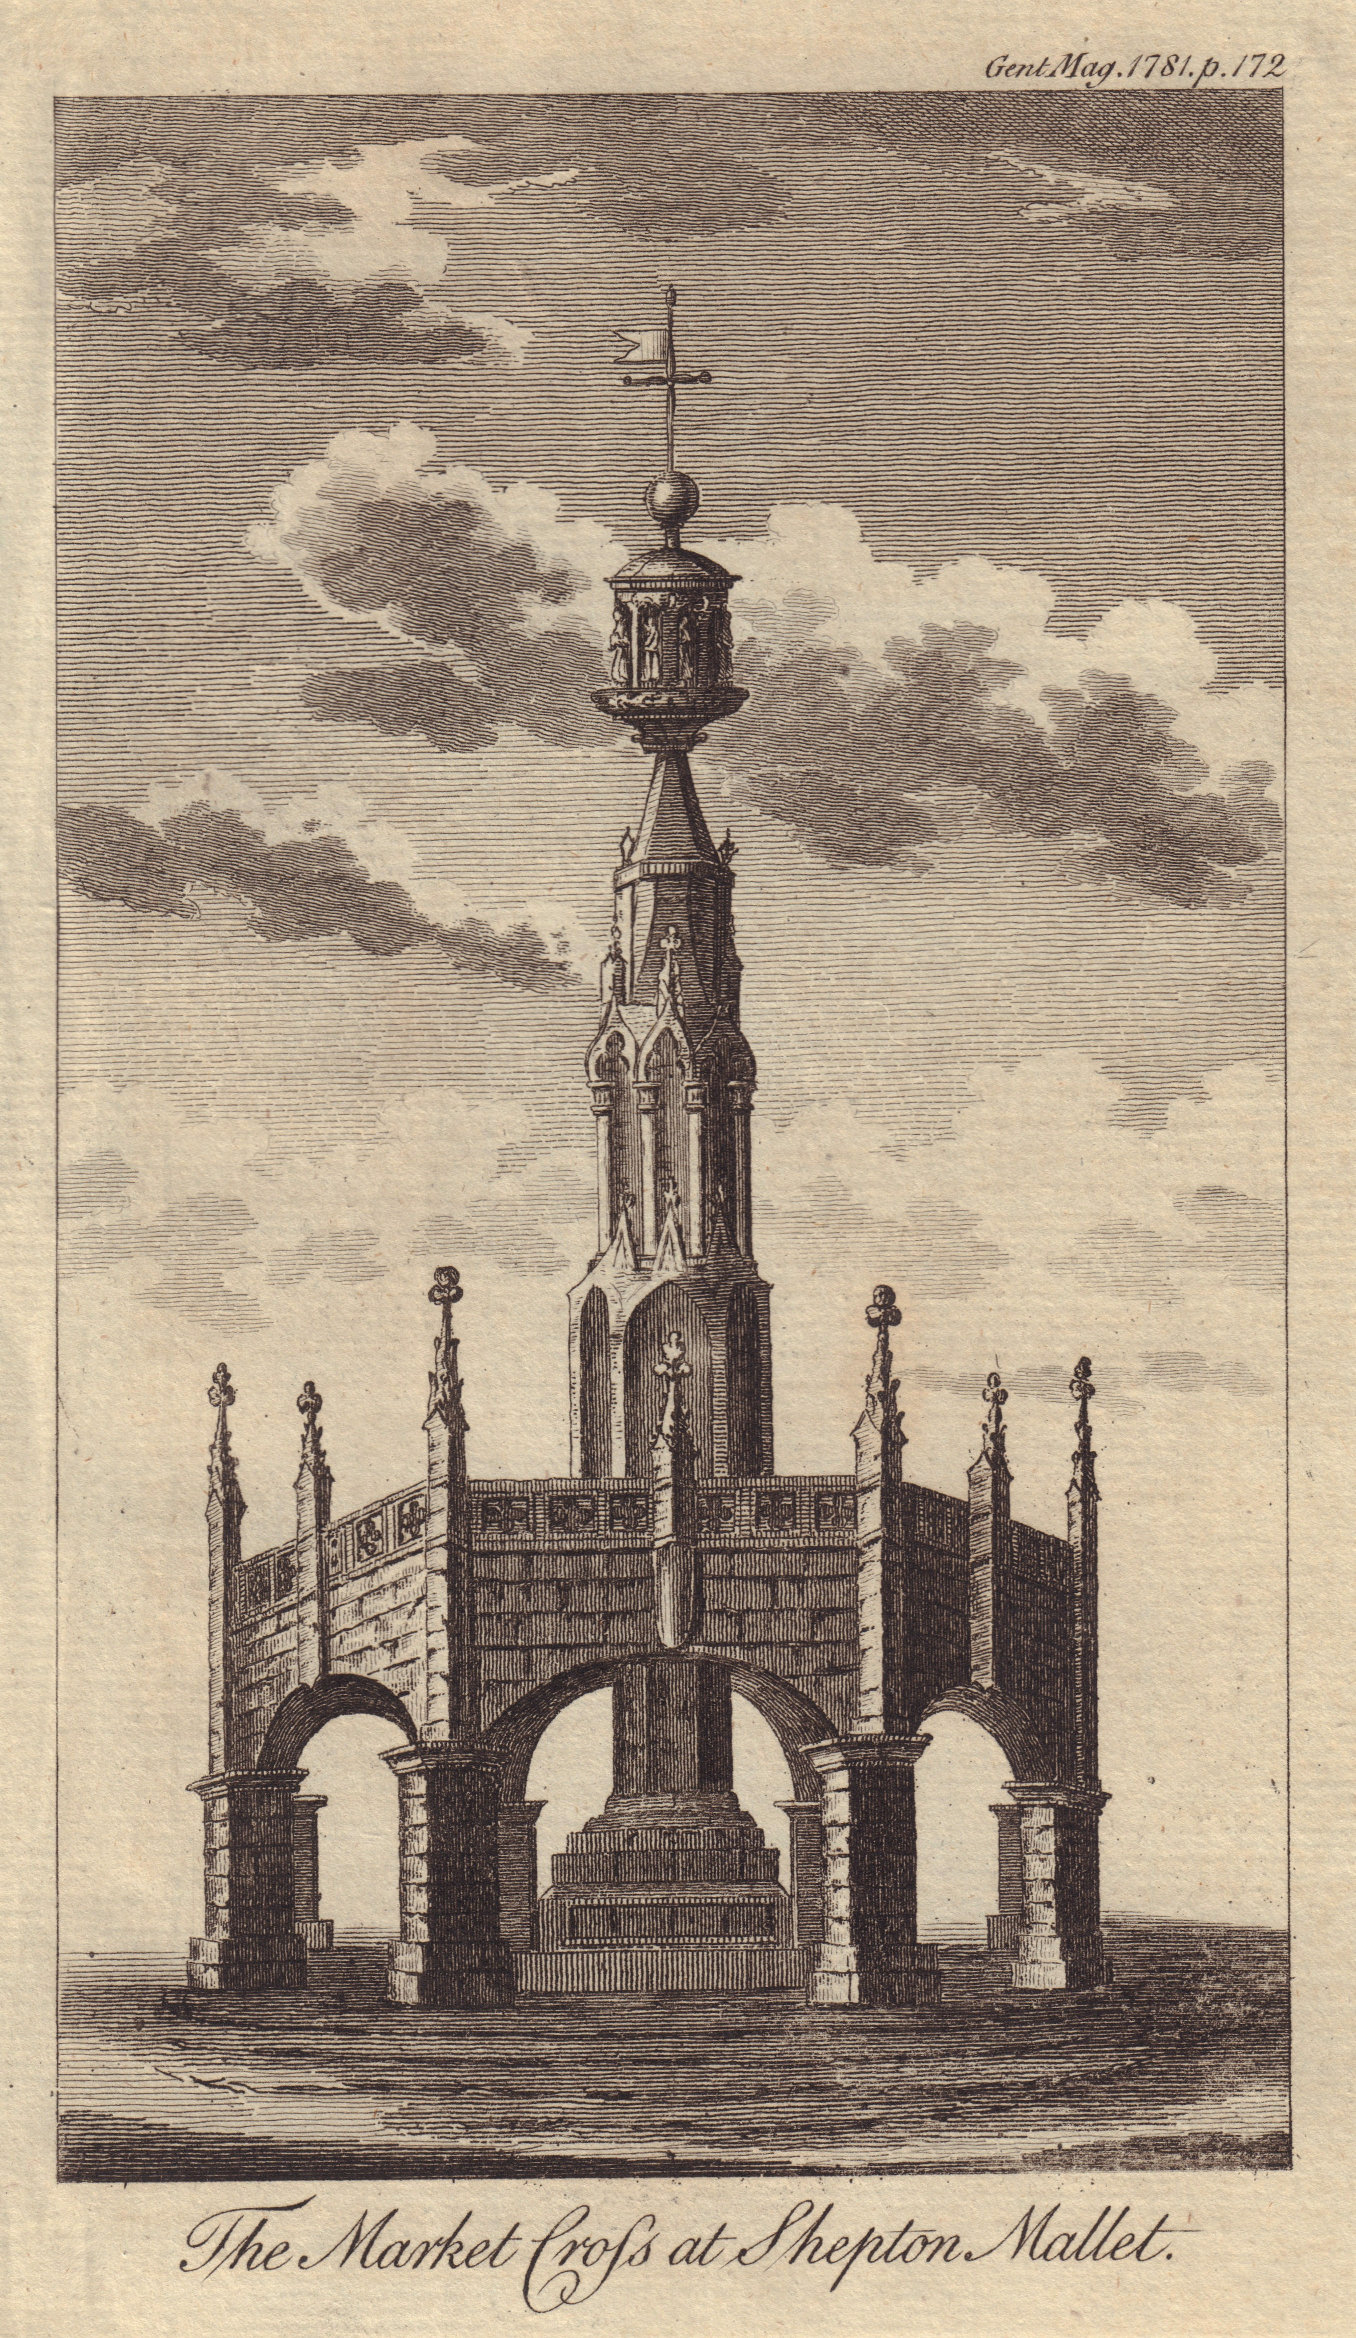 The Market Cross at Shepton Mallet, Somerset. GENTS MAG 1781 old antique print